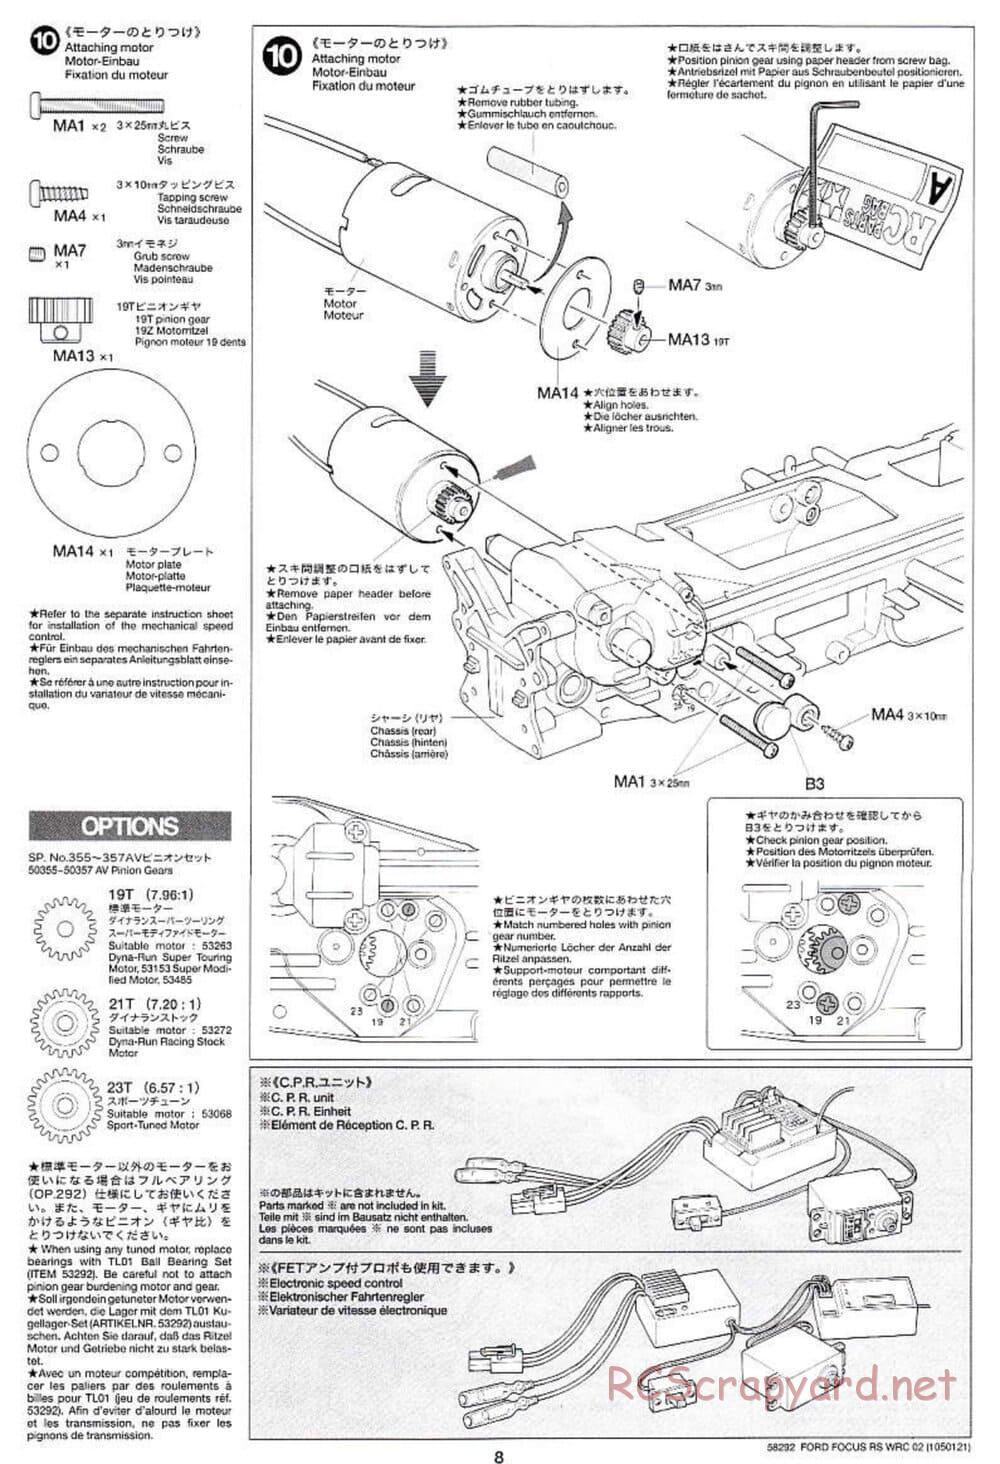 Tamiya - Ford Focus RS WRC 02 - TL-01 Chassis - Manual - Page 8